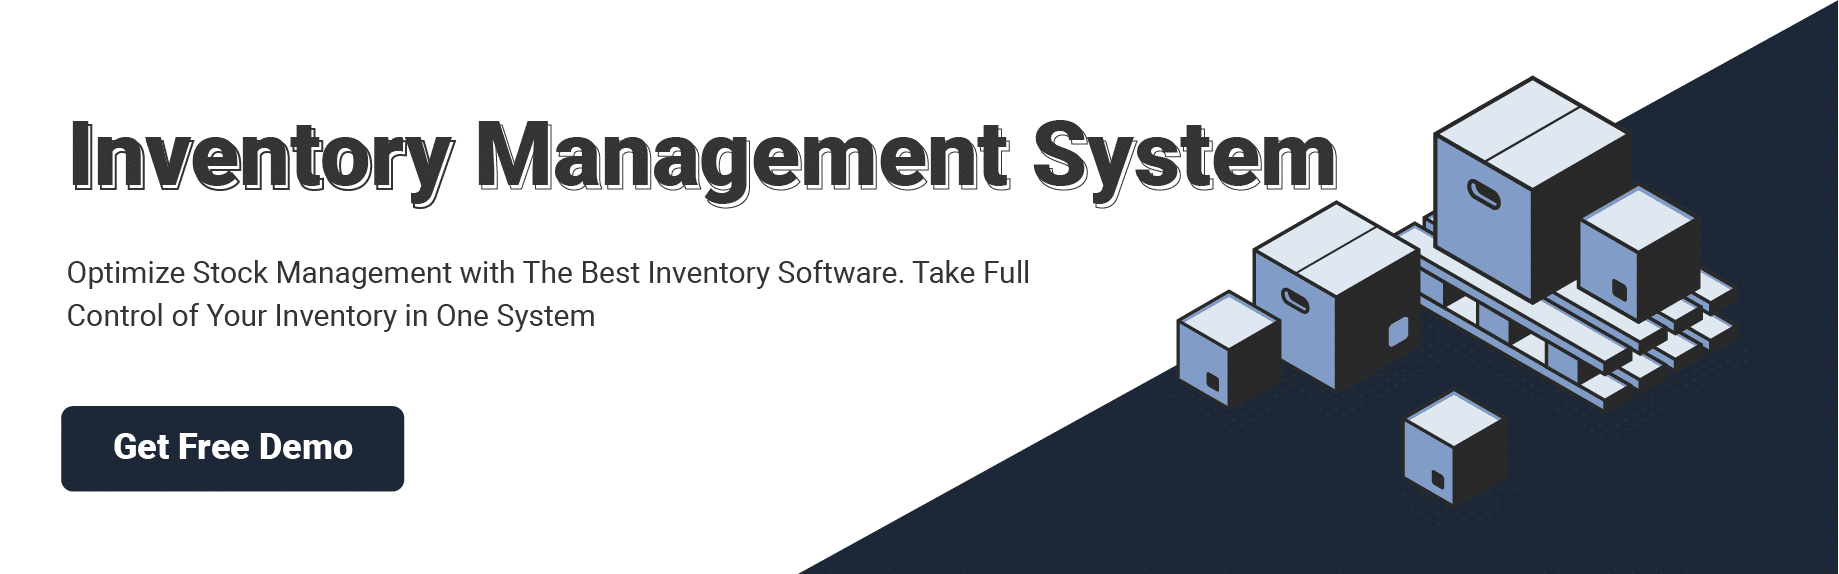 erp system inventory management